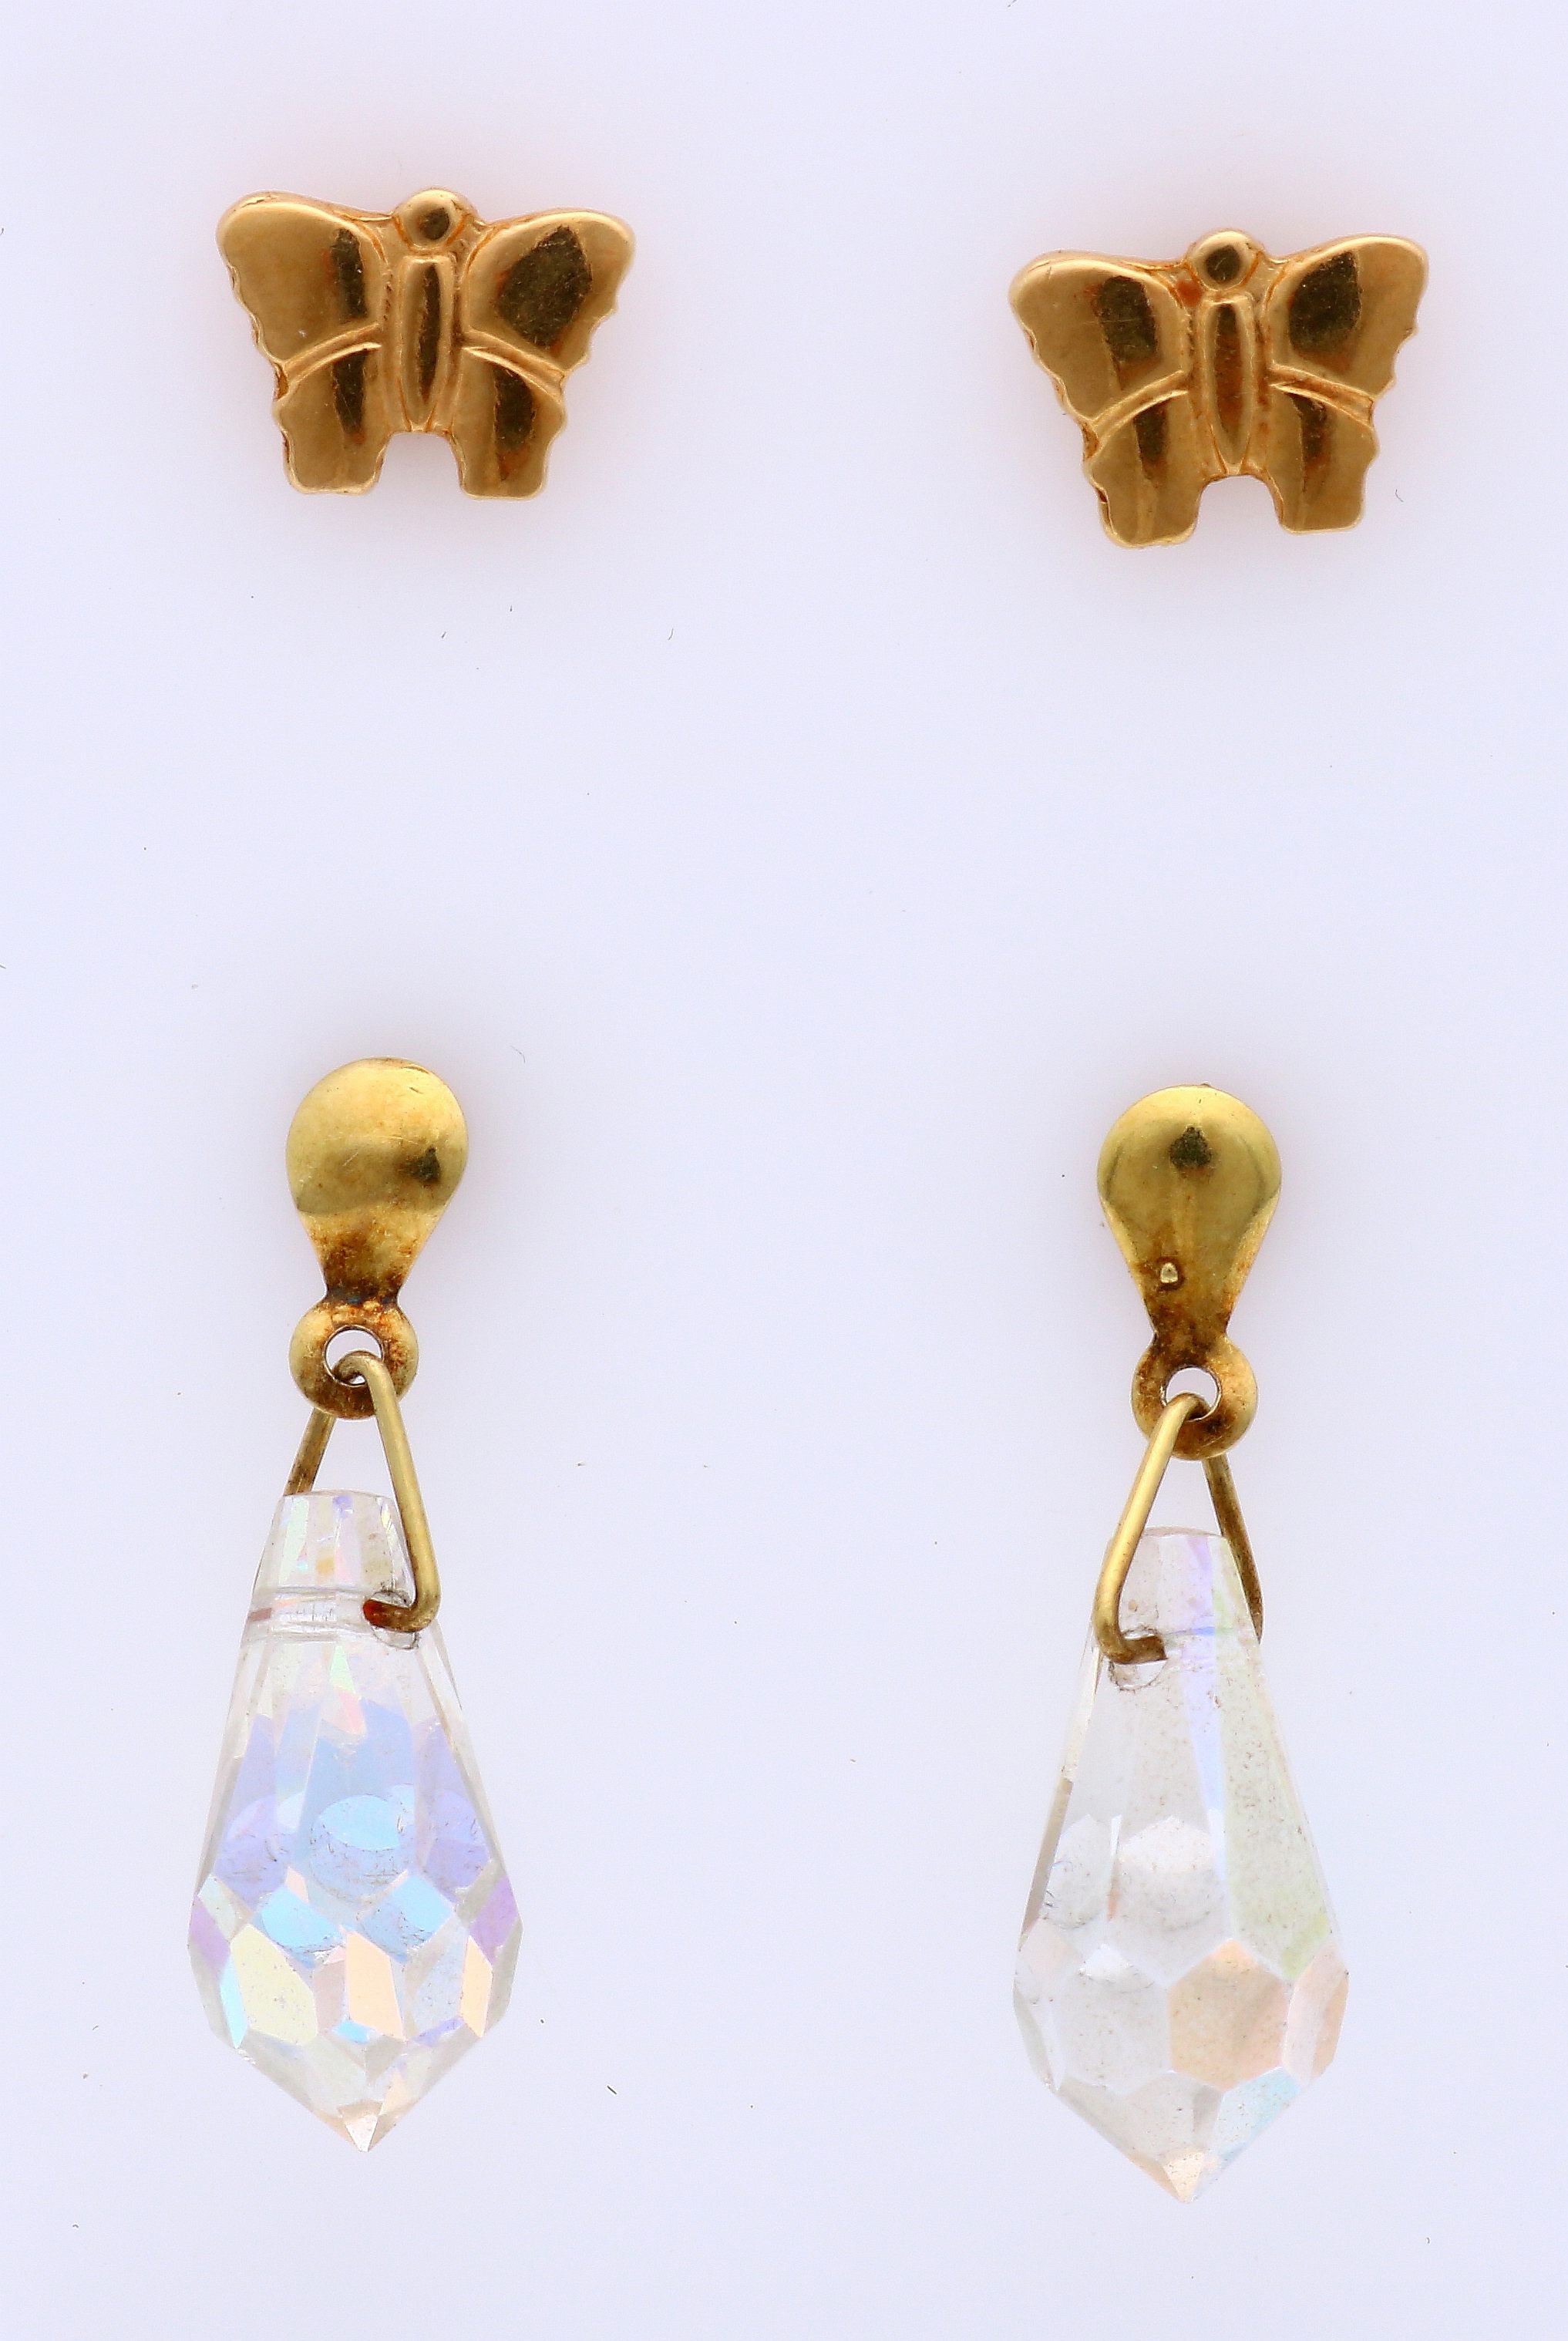 2 Pairs of gold earrings